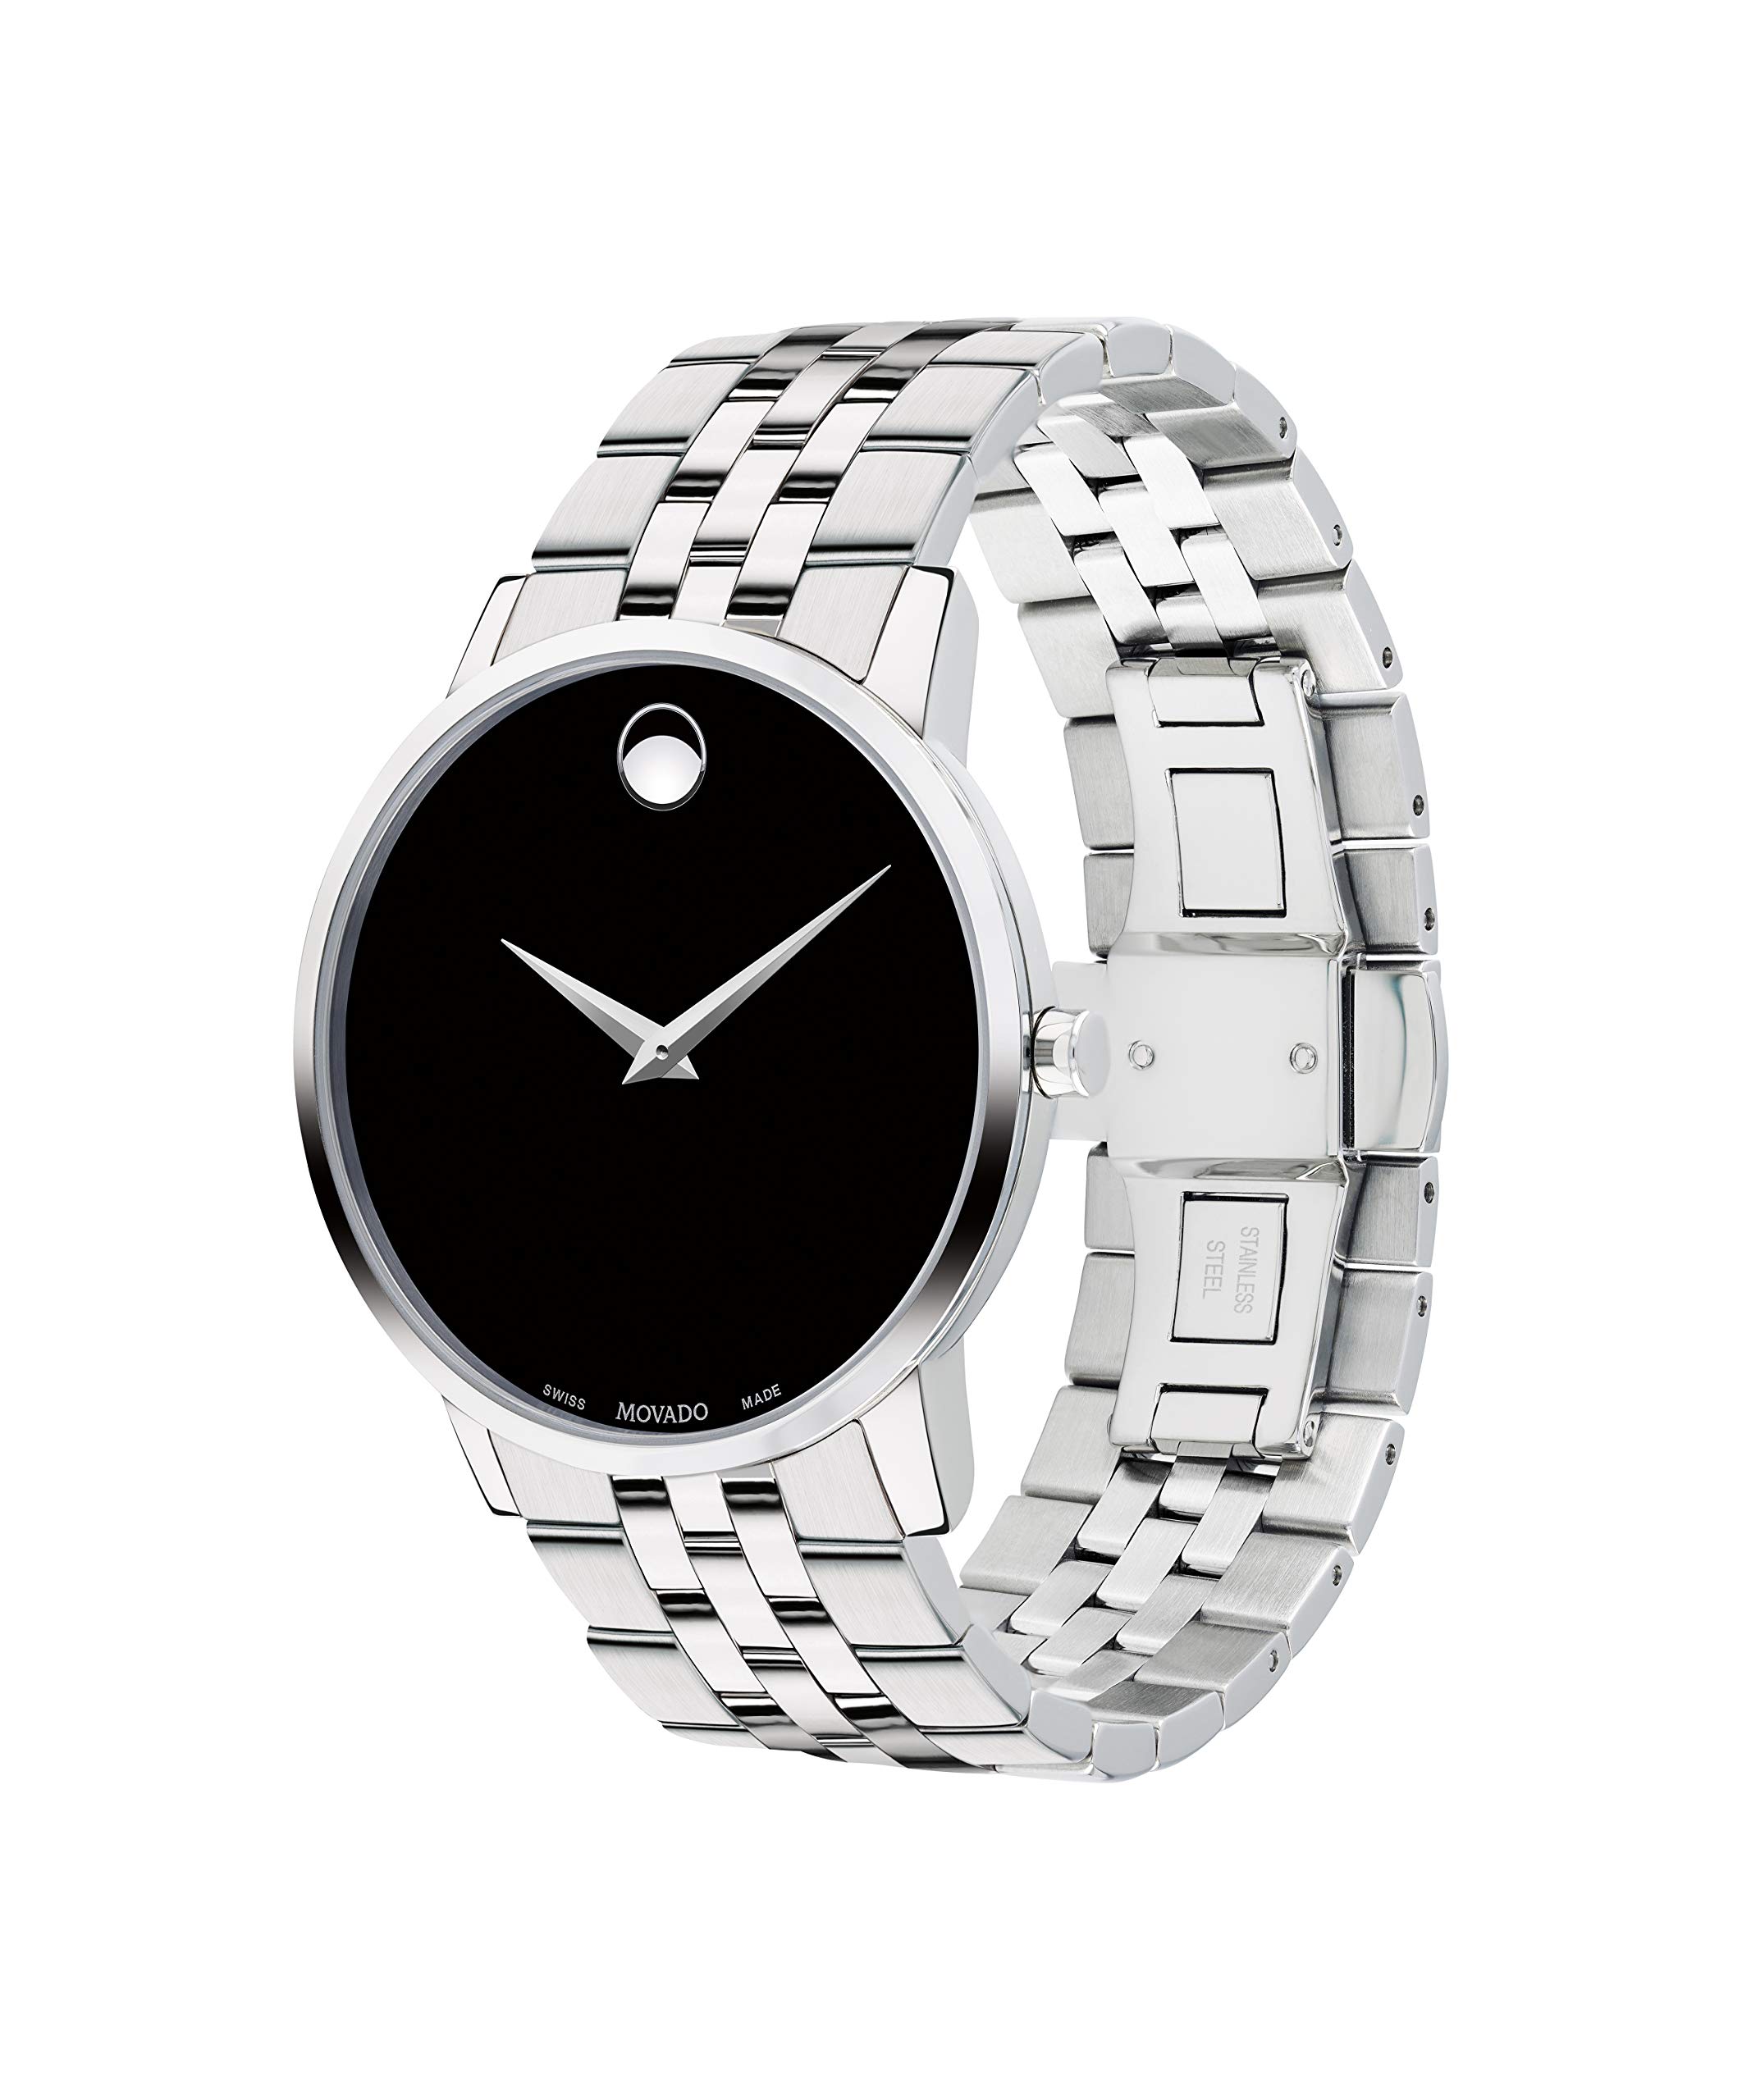 Movado Men's Museum Stainless Steel Watch with Concave Dot Museum Dial, Silver/Black (Model 607199)